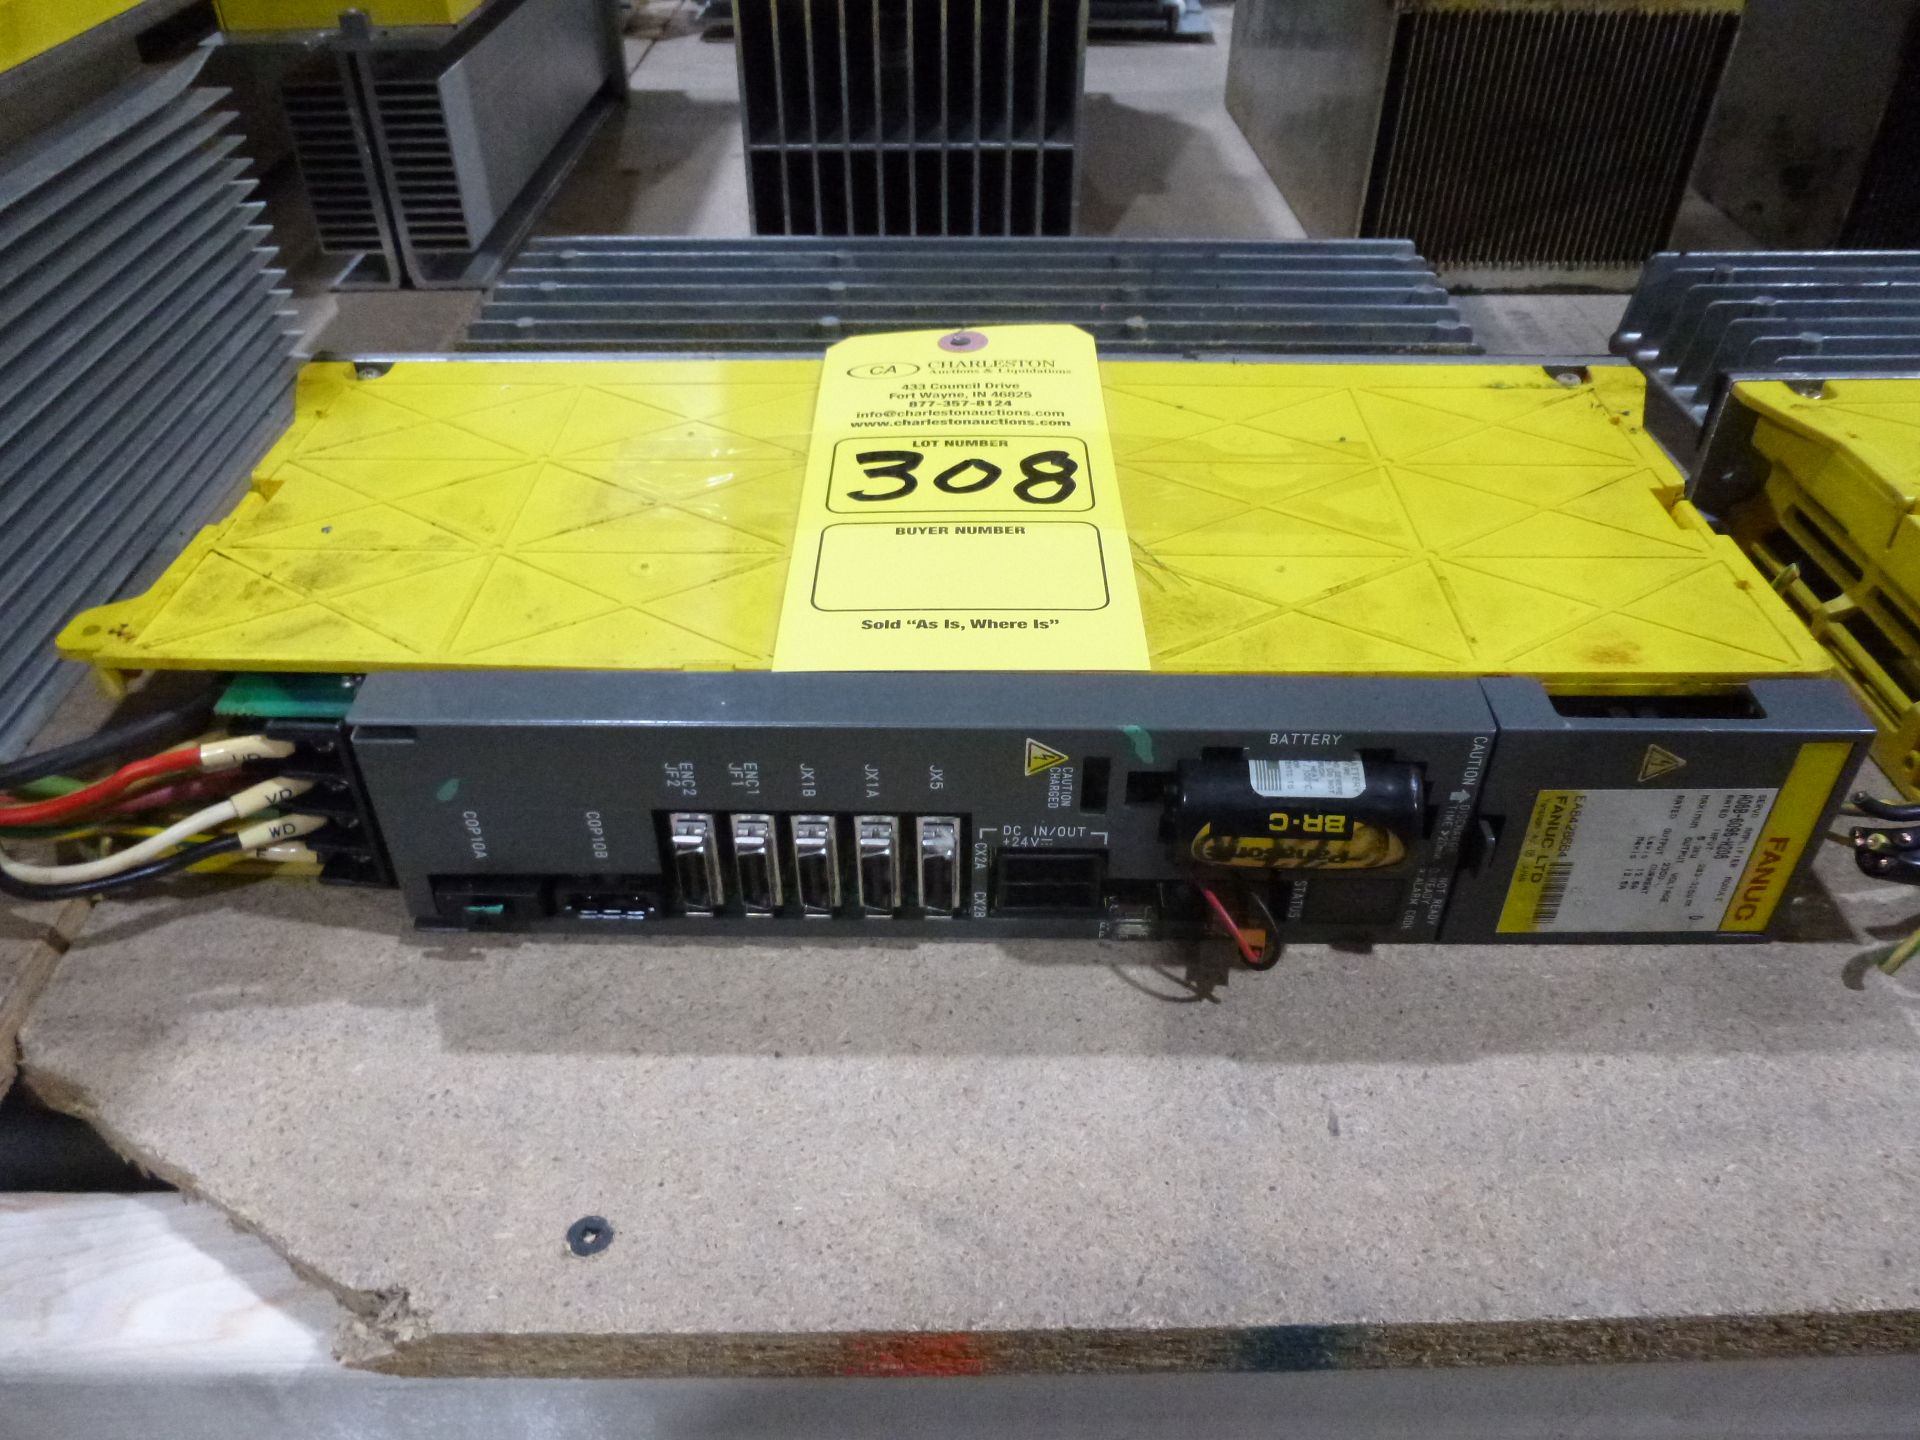 Fanuc servo amplifier module A06B-6096-H206, as always with Brolyn LLC auctions, all lots can be